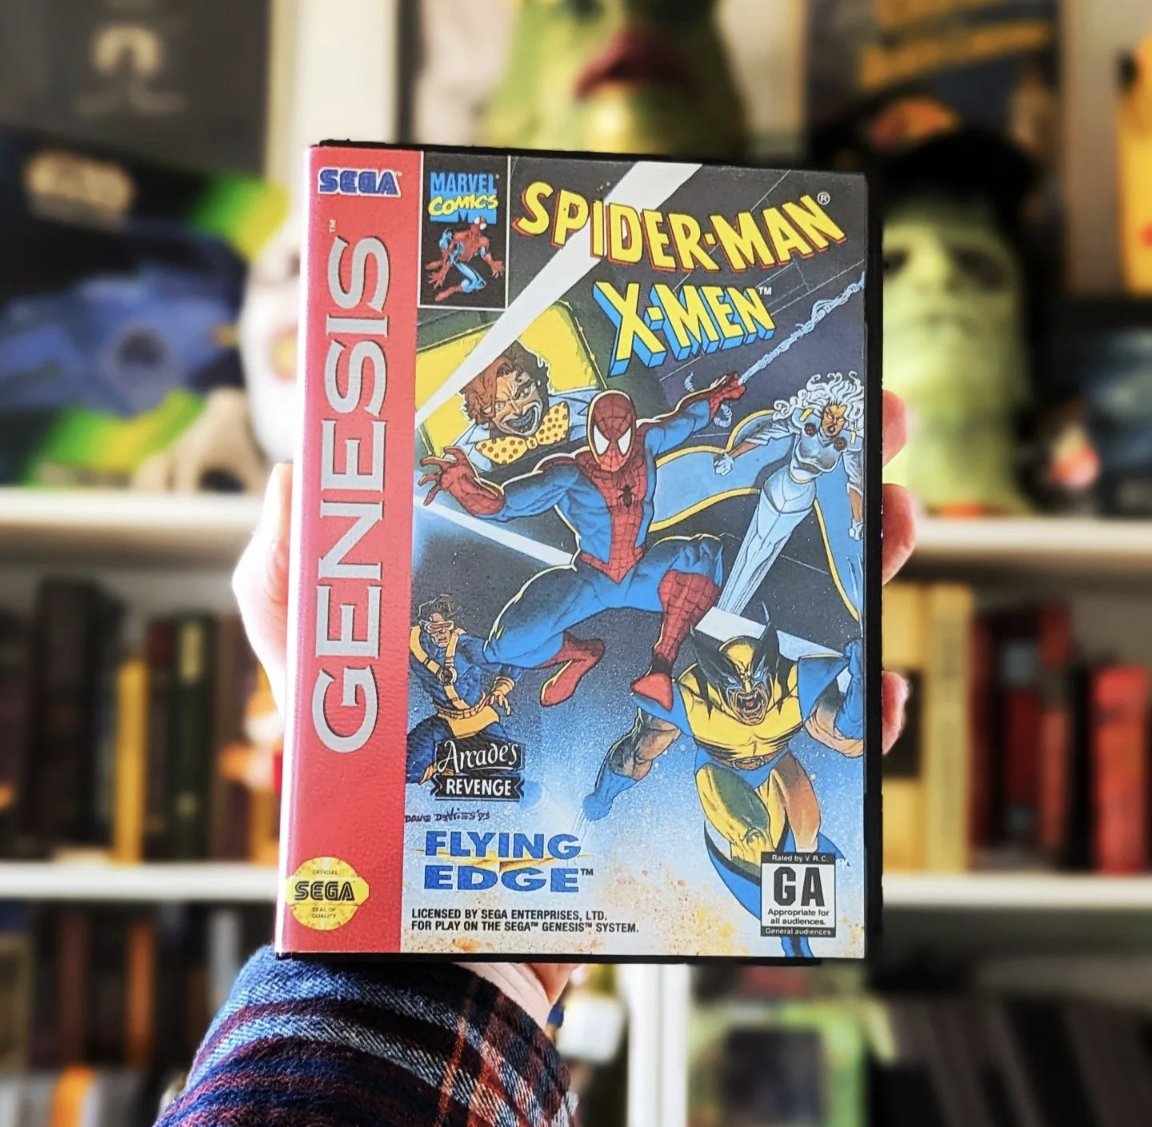 Spider-Man and X-Men: Arcade's Revenge Complete In Box! 🤩✨ This was the first game I played on the Sega Genesis and it's so rad to be able to add it back into the CIB collection! 😊💯 #sega #Marvel #SpiderMan #xmen #MarvelComics #RETROGAMING #games #gaming #videogames #sonic